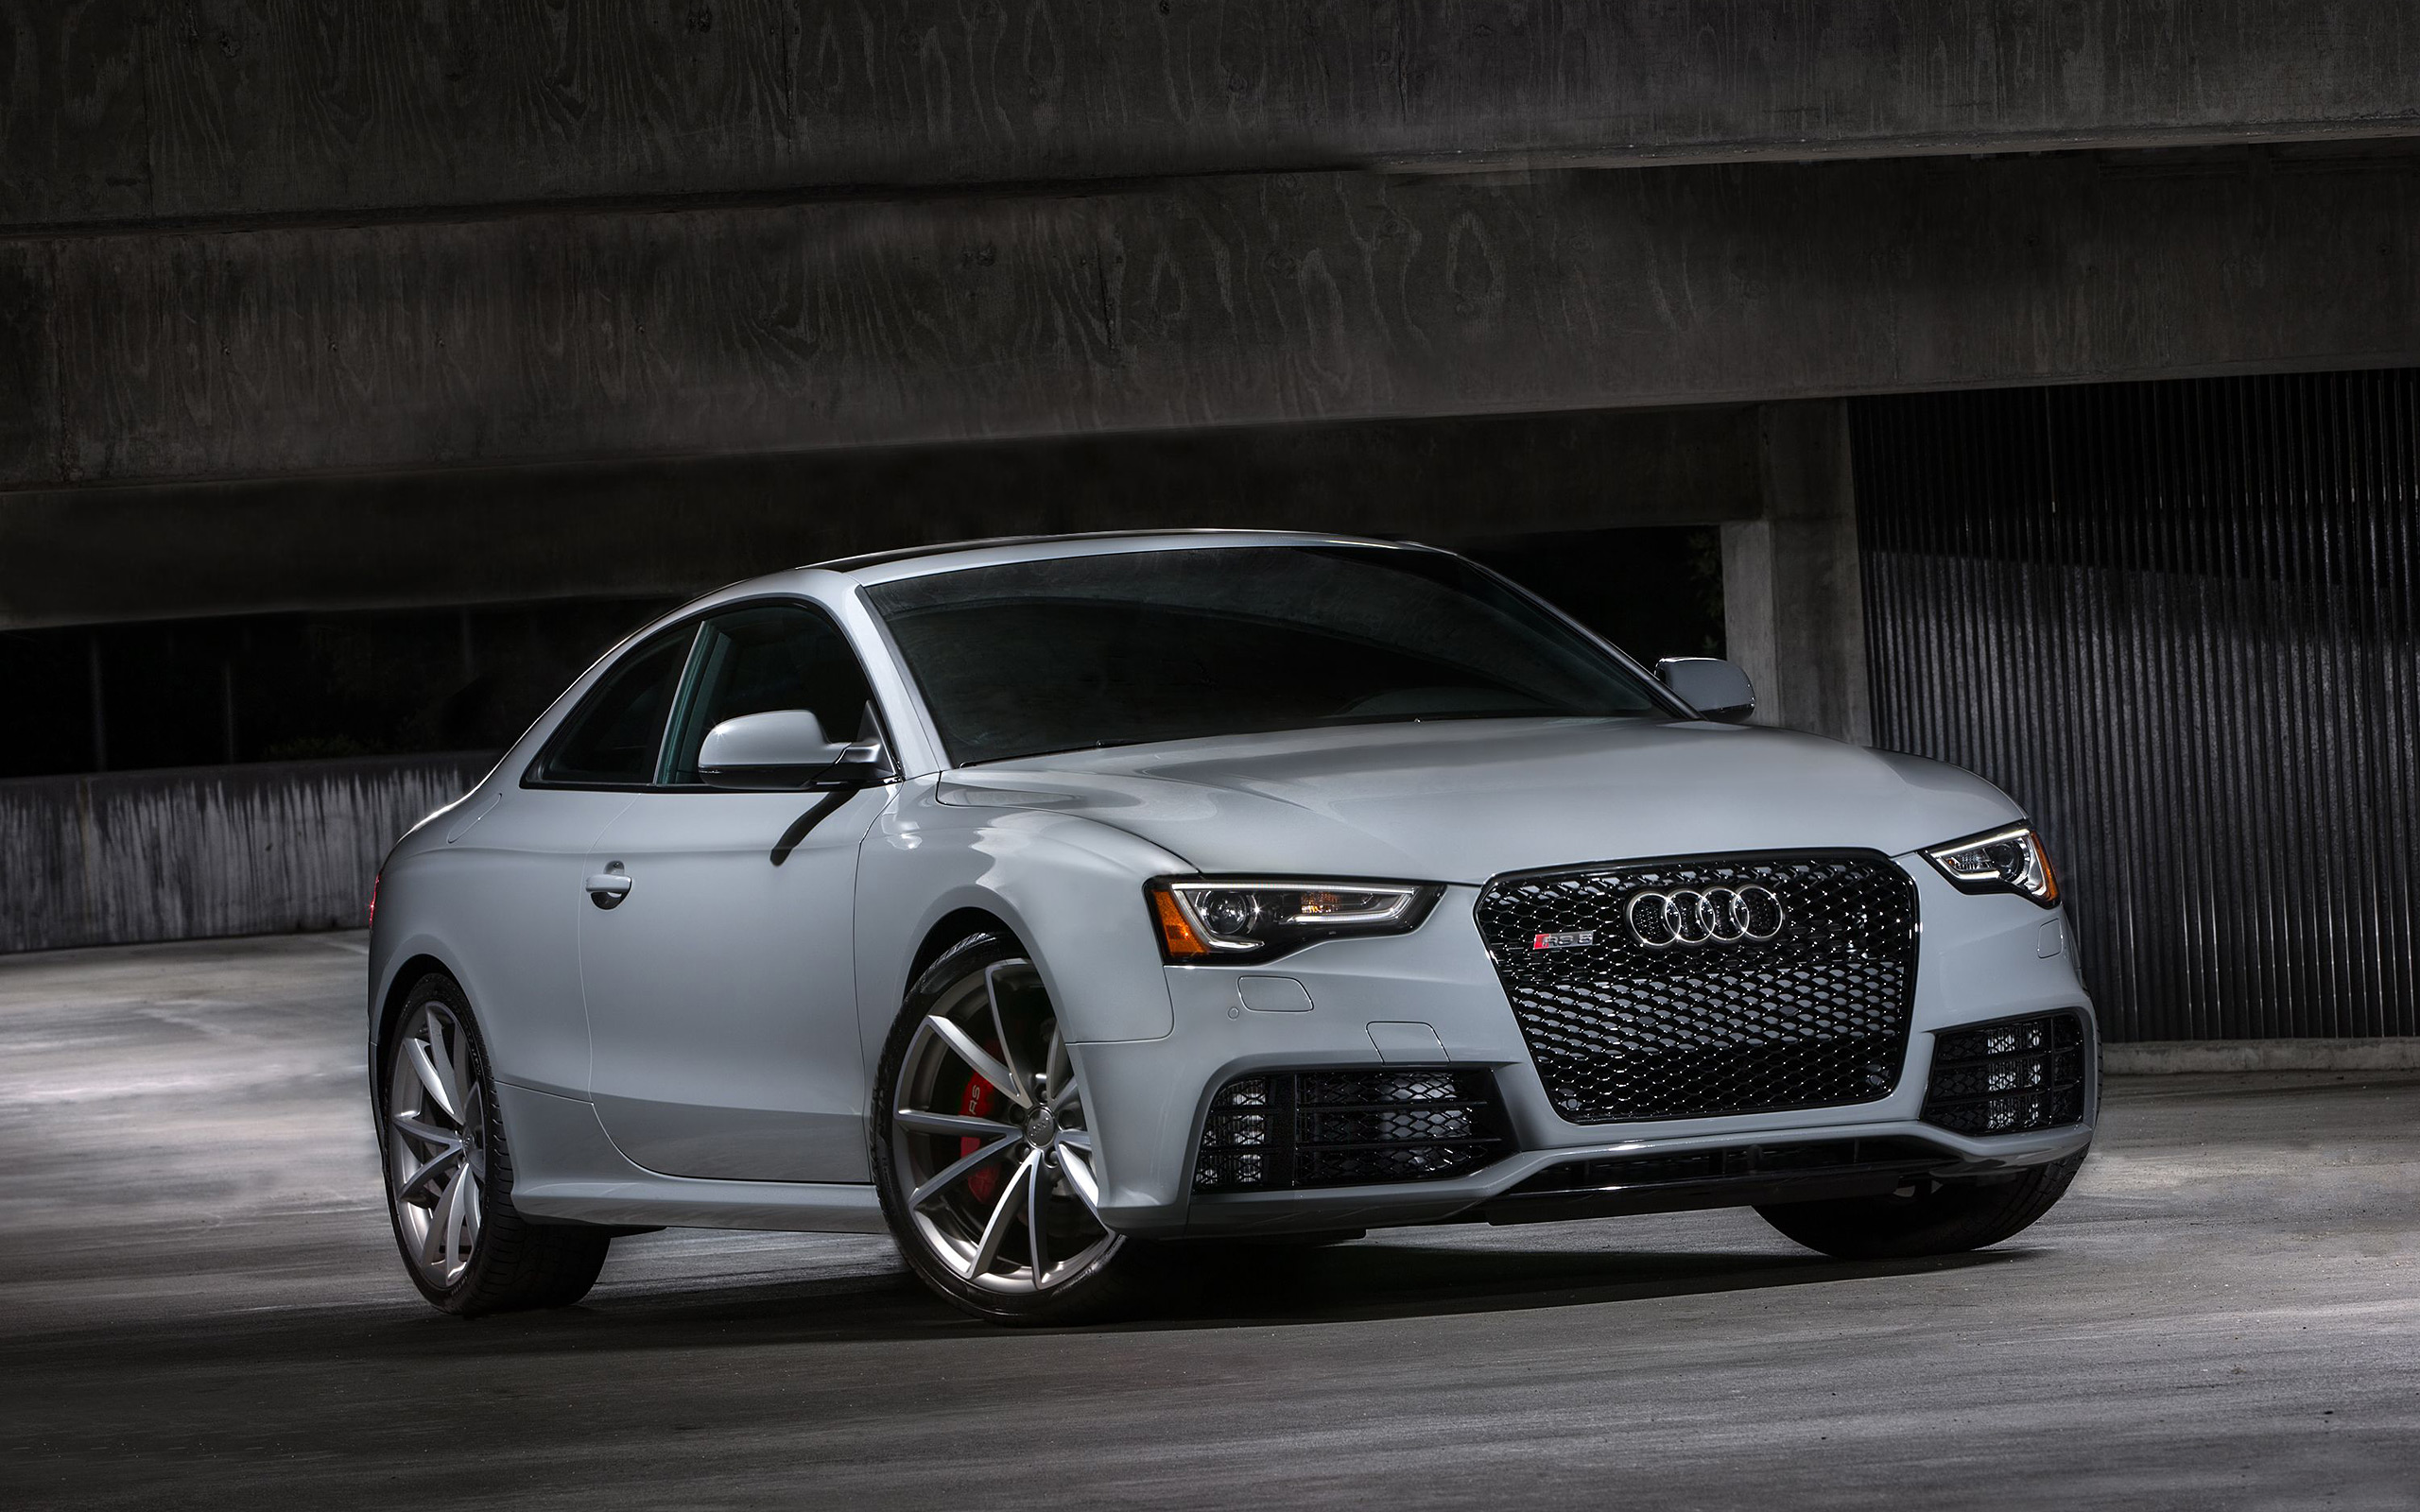  2015 Audi RS5 Coupe Sport Edition Wallpaper.